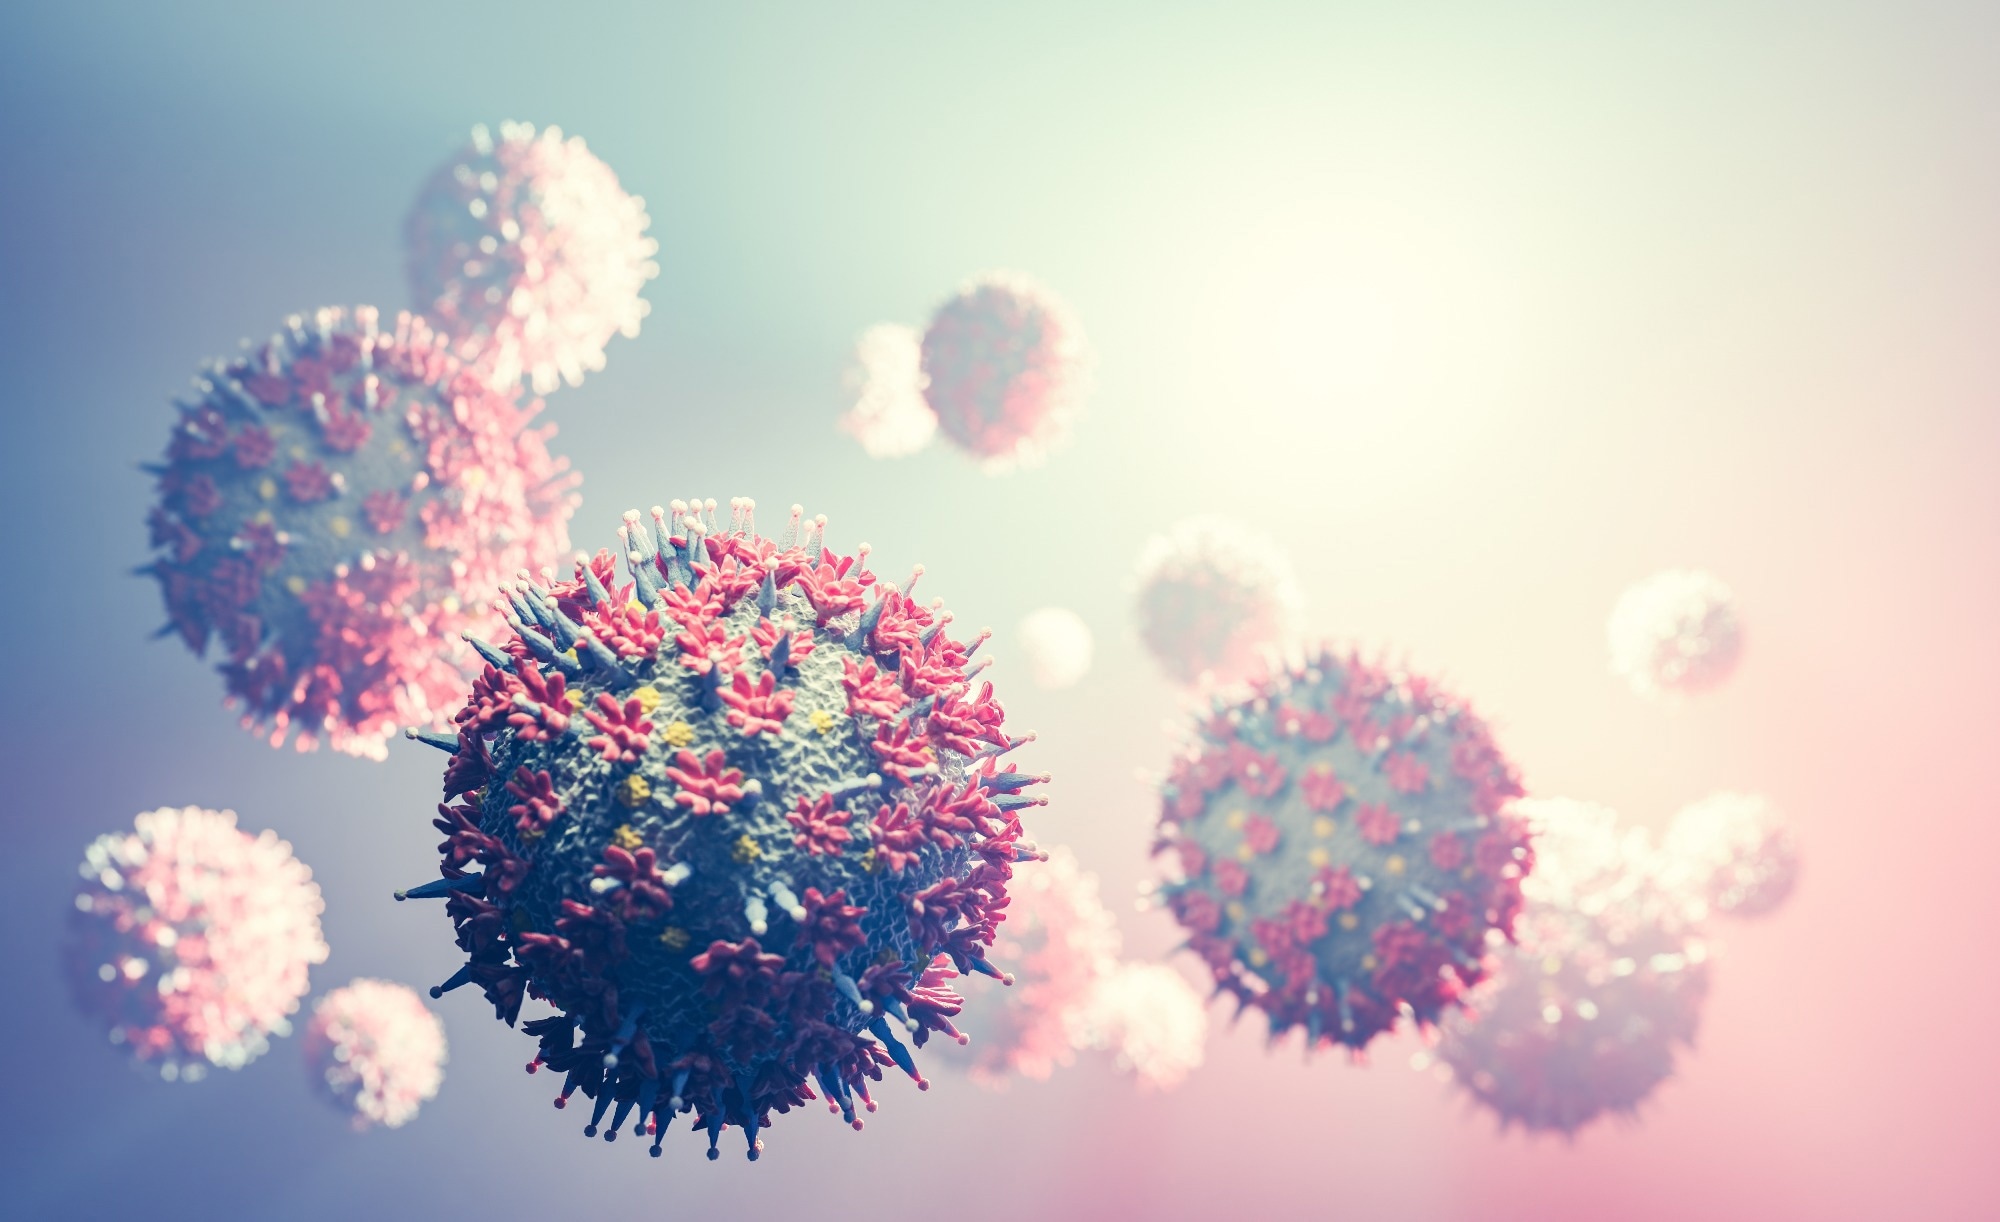 Study: Preclinical development of kinetin as a safe error-prone SARS-CoV-2 antiviral able to attenuate virus-induced inflammation. Image Credit: PHOTOCREO Michal Bednarek/Shutterstock